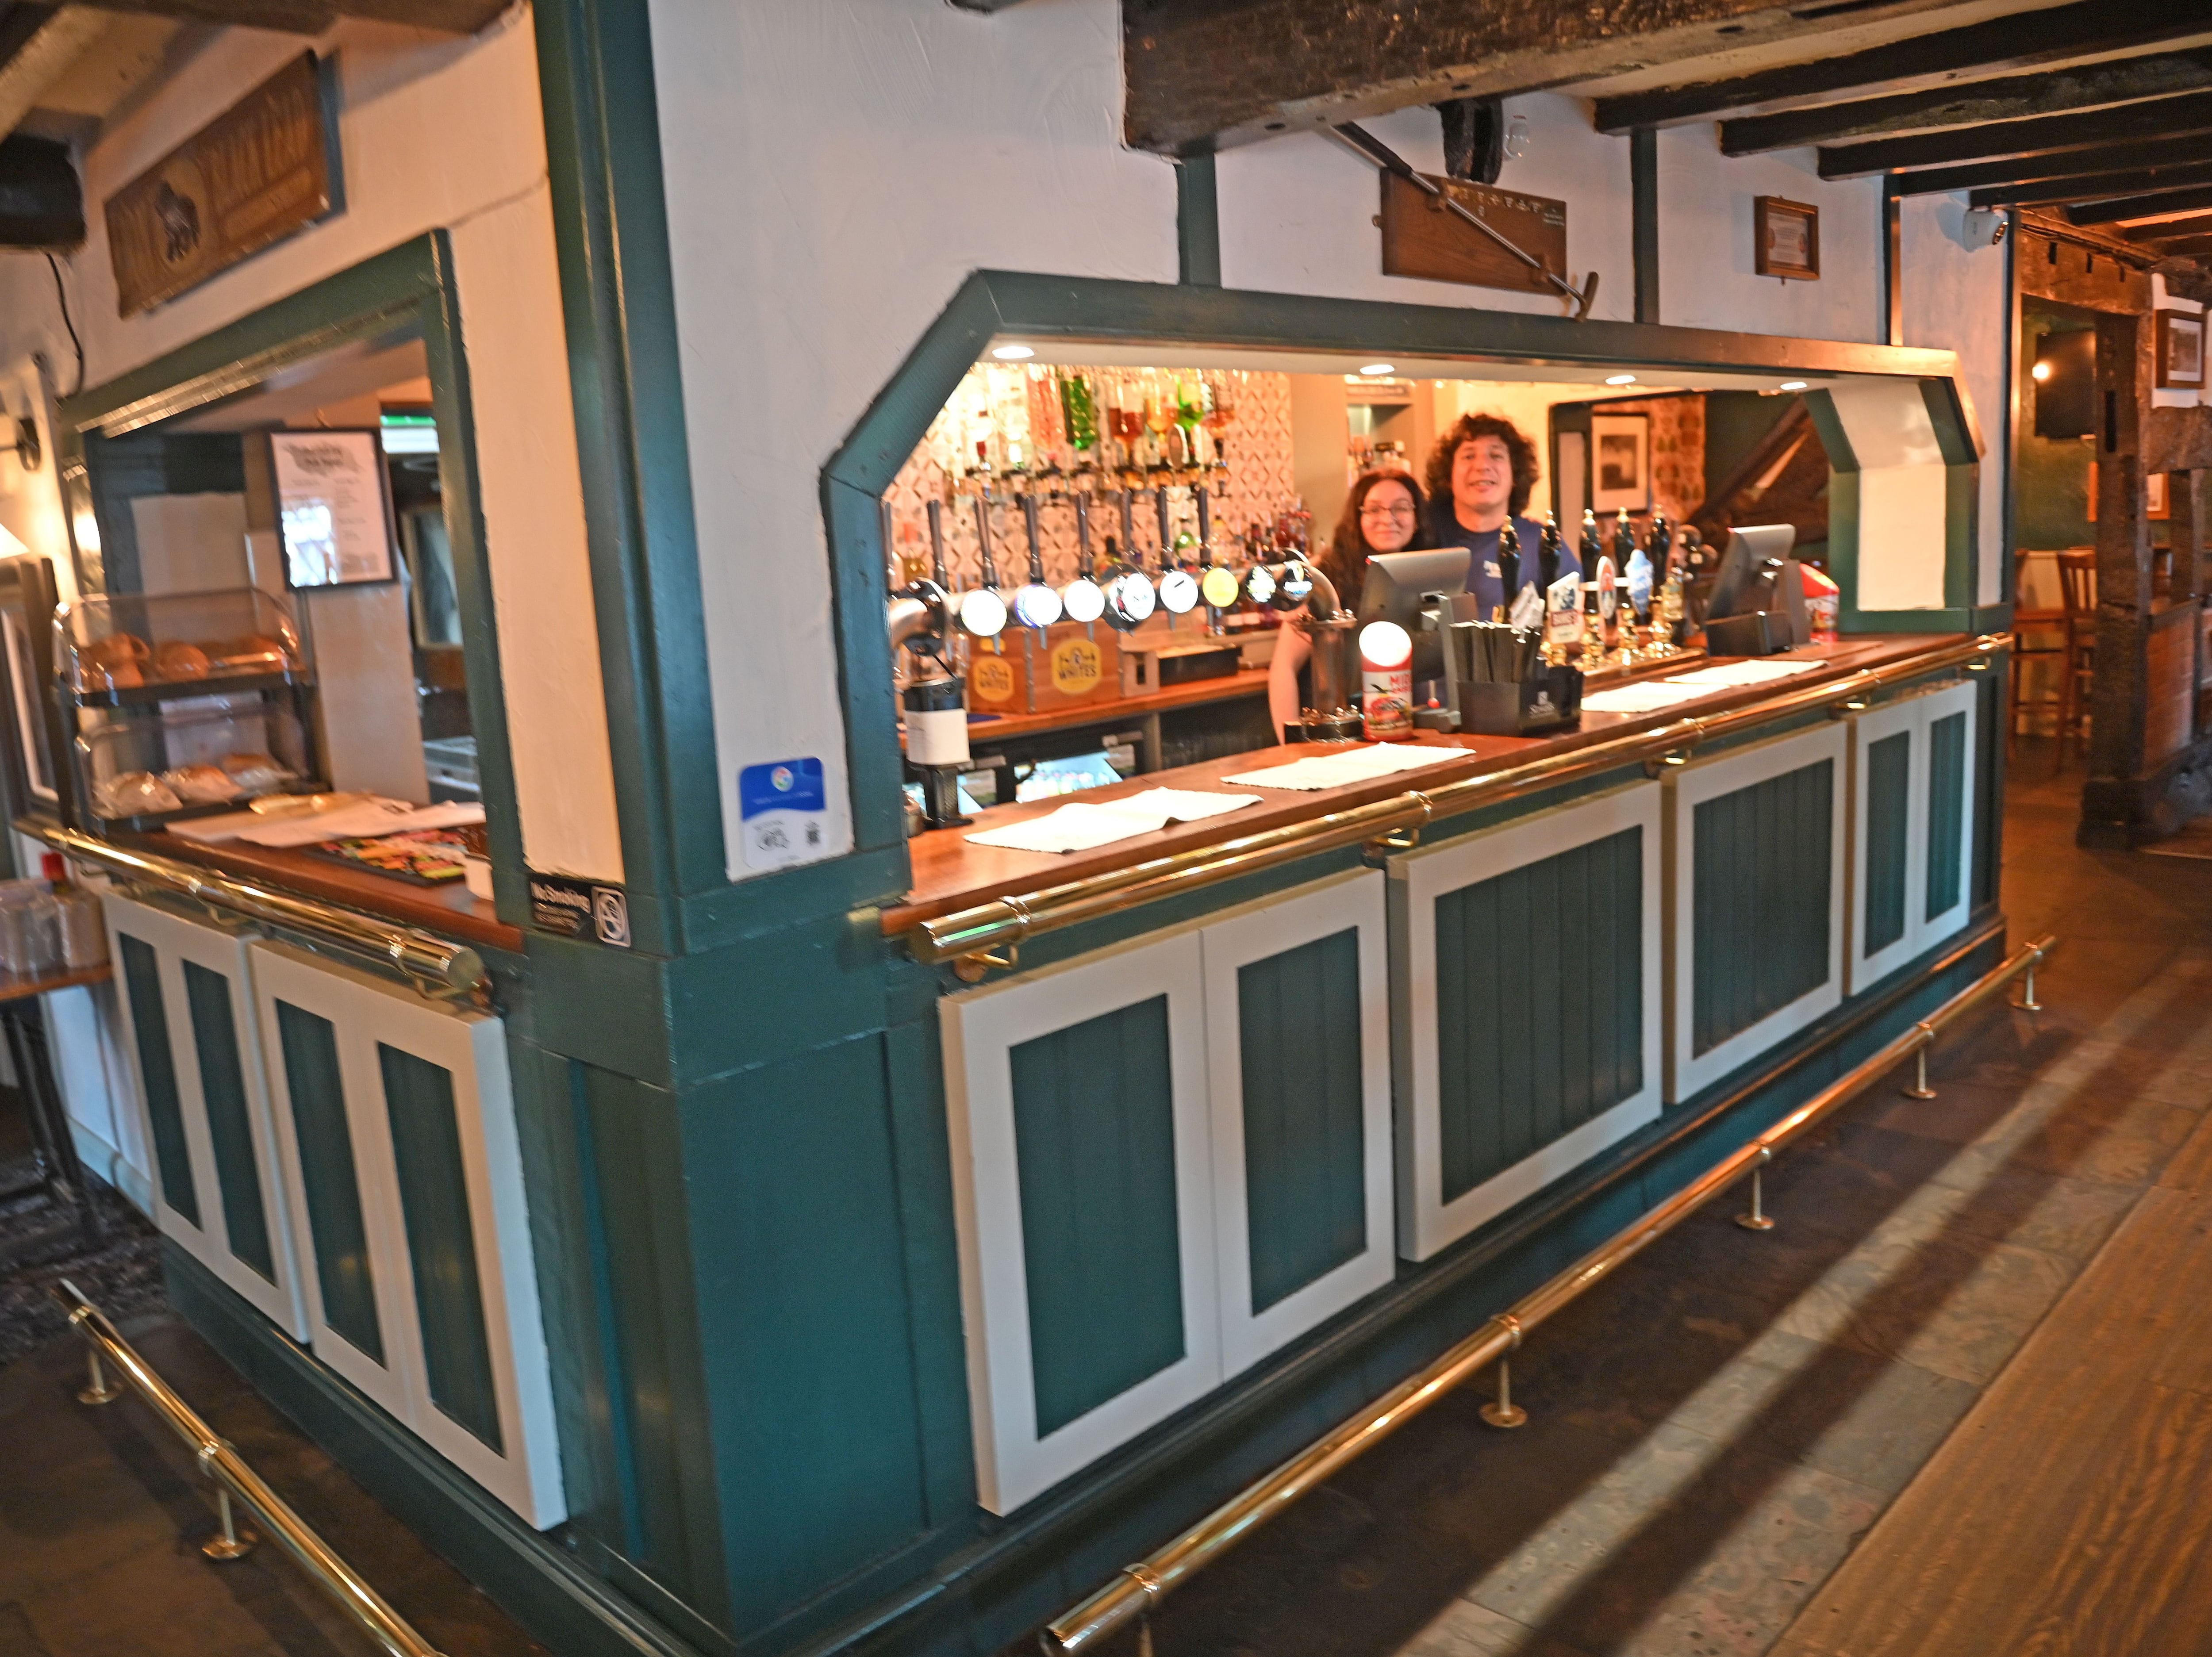 Watch: Inside the award-winning pub at the heart of a Staffordshire village